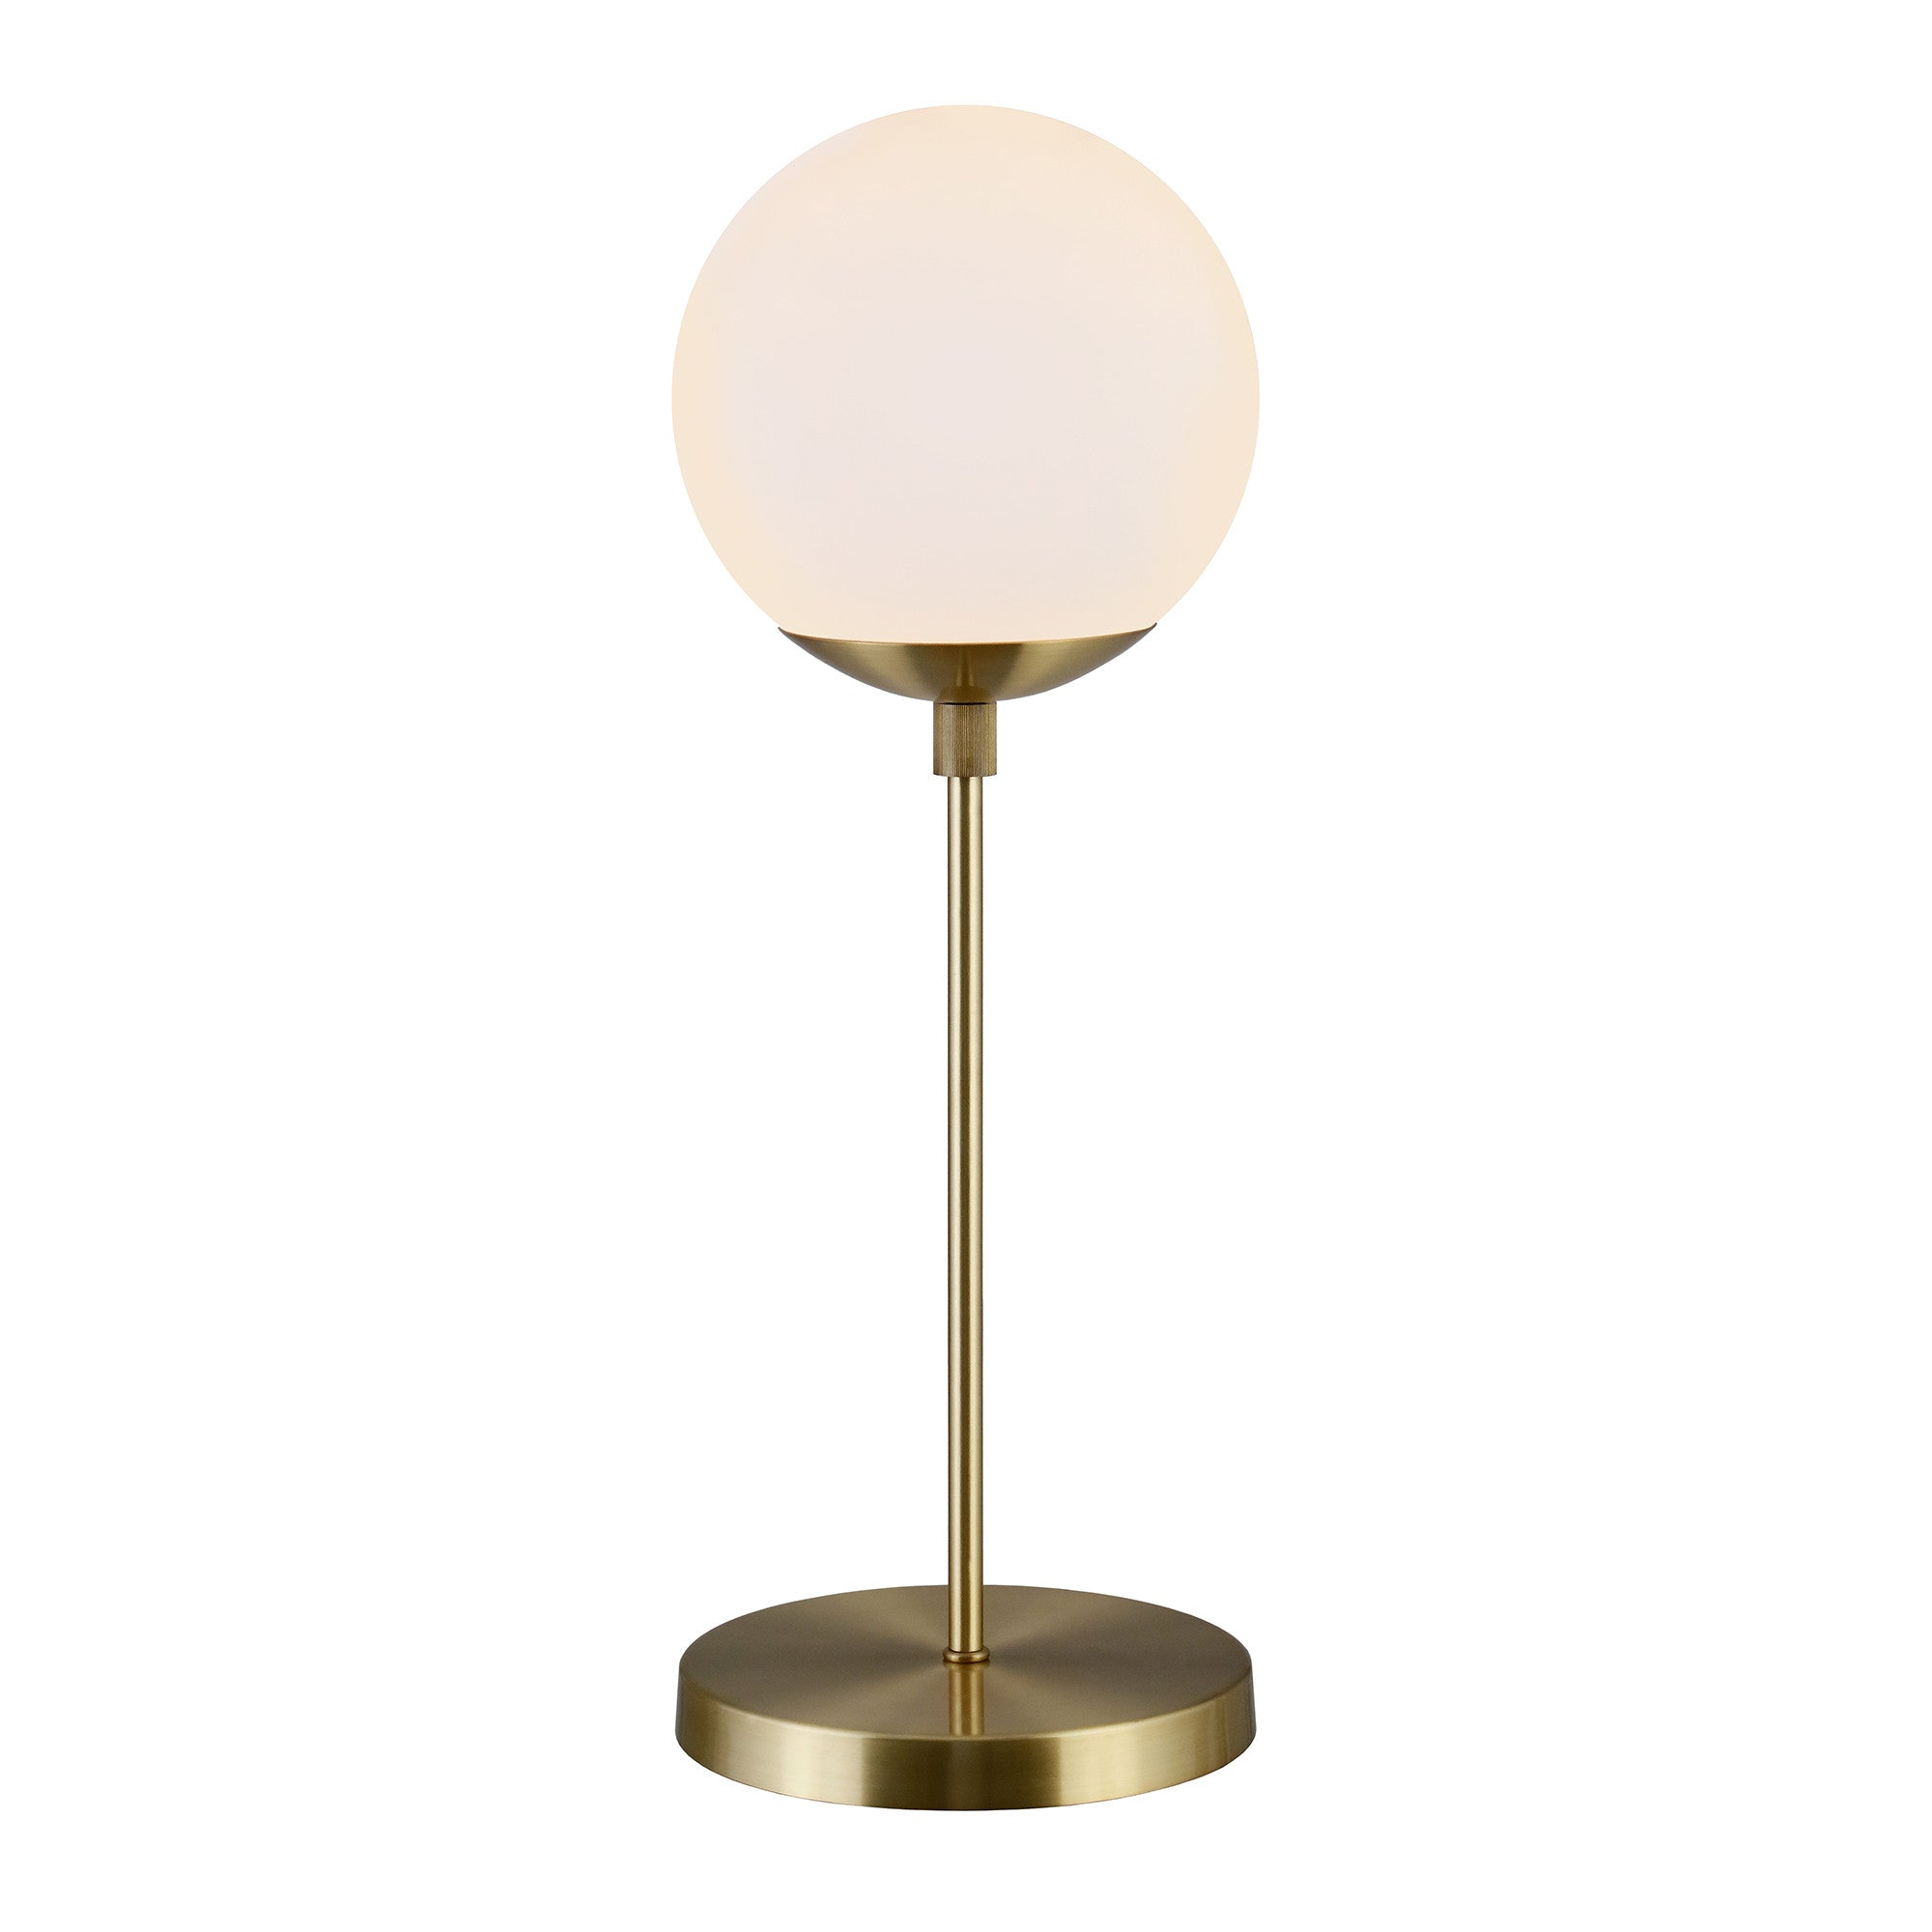 21" Brass Metal Globe Table Lamp With Clear Globe Shade